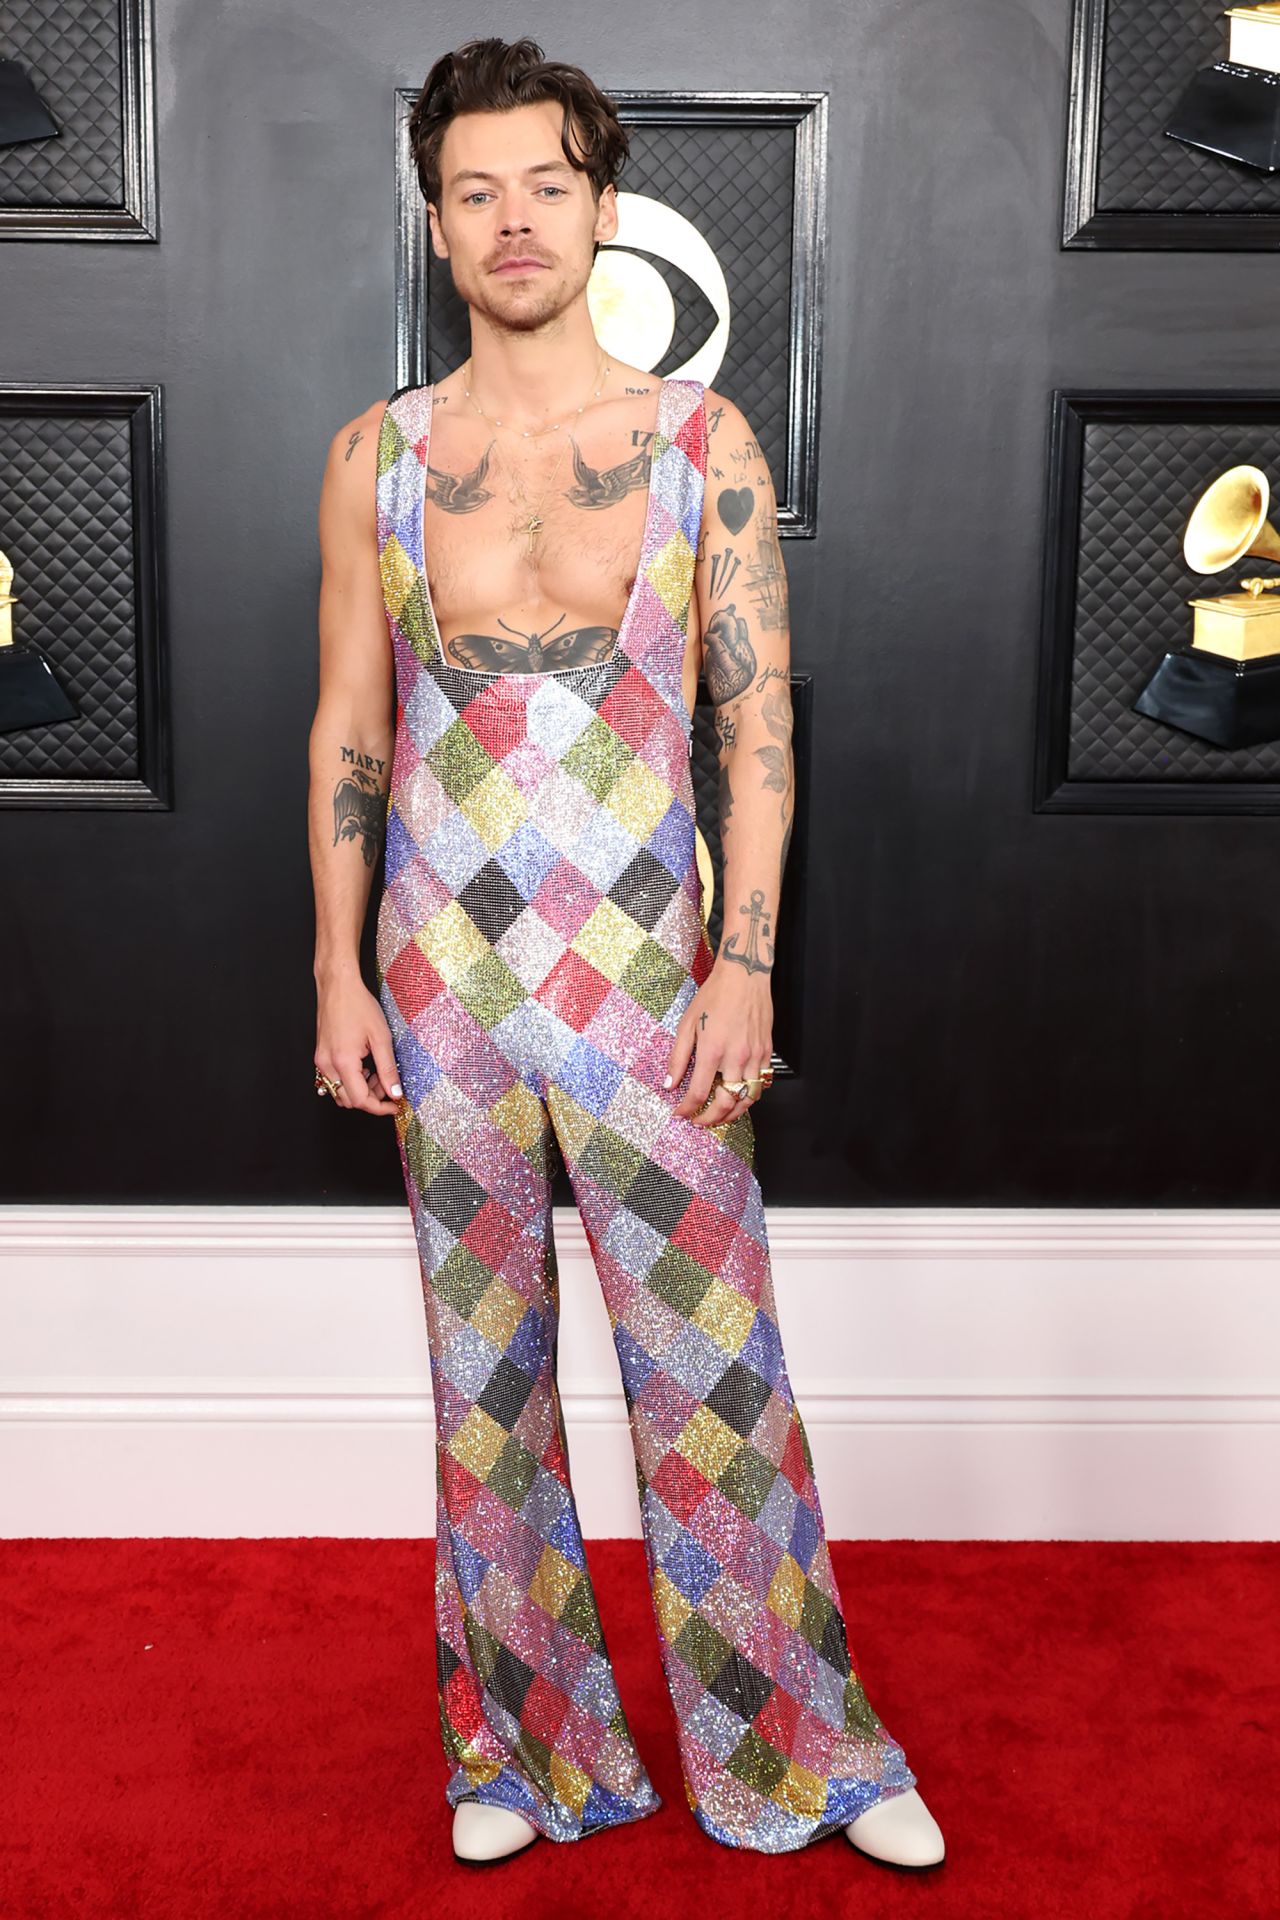 Harry Styles in a rainbow-colored harlequin jumpsuit by Egonlab and Swarovski.